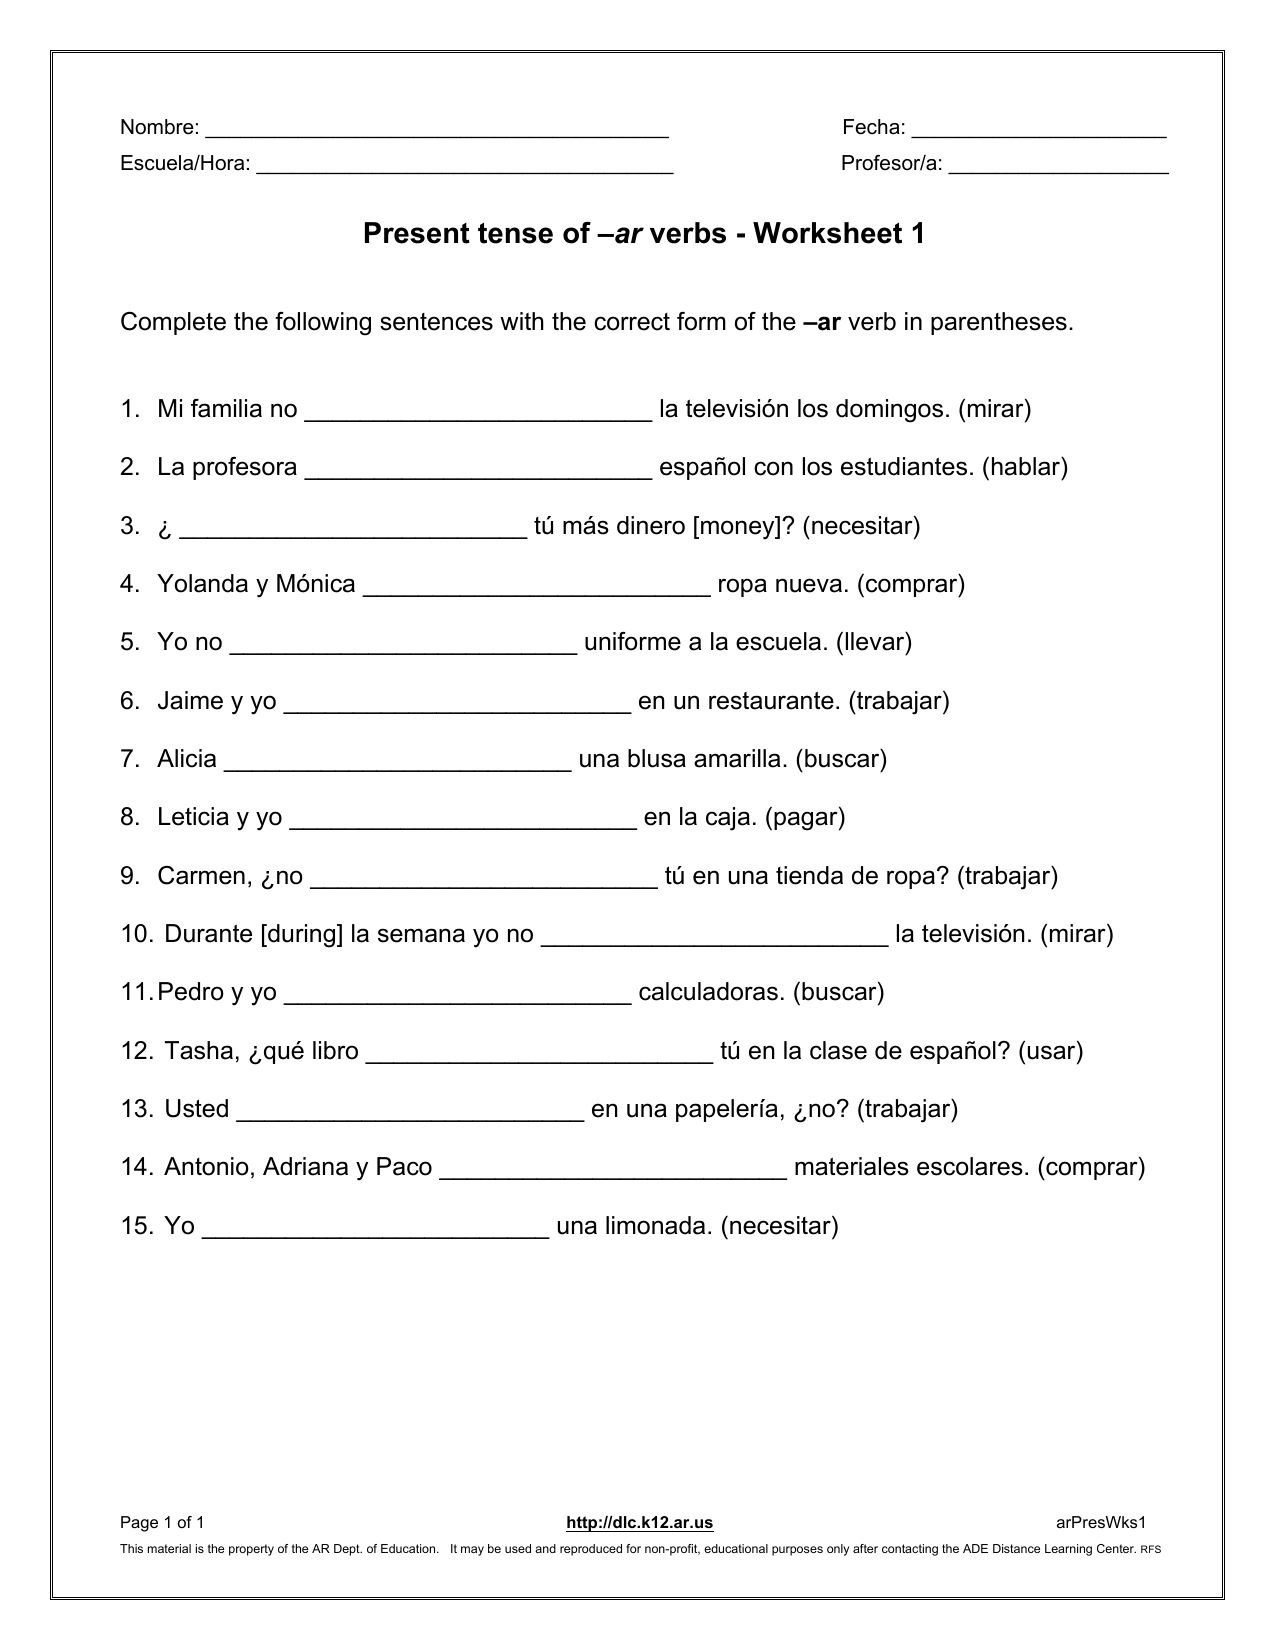 subjunctive-mood-exercise